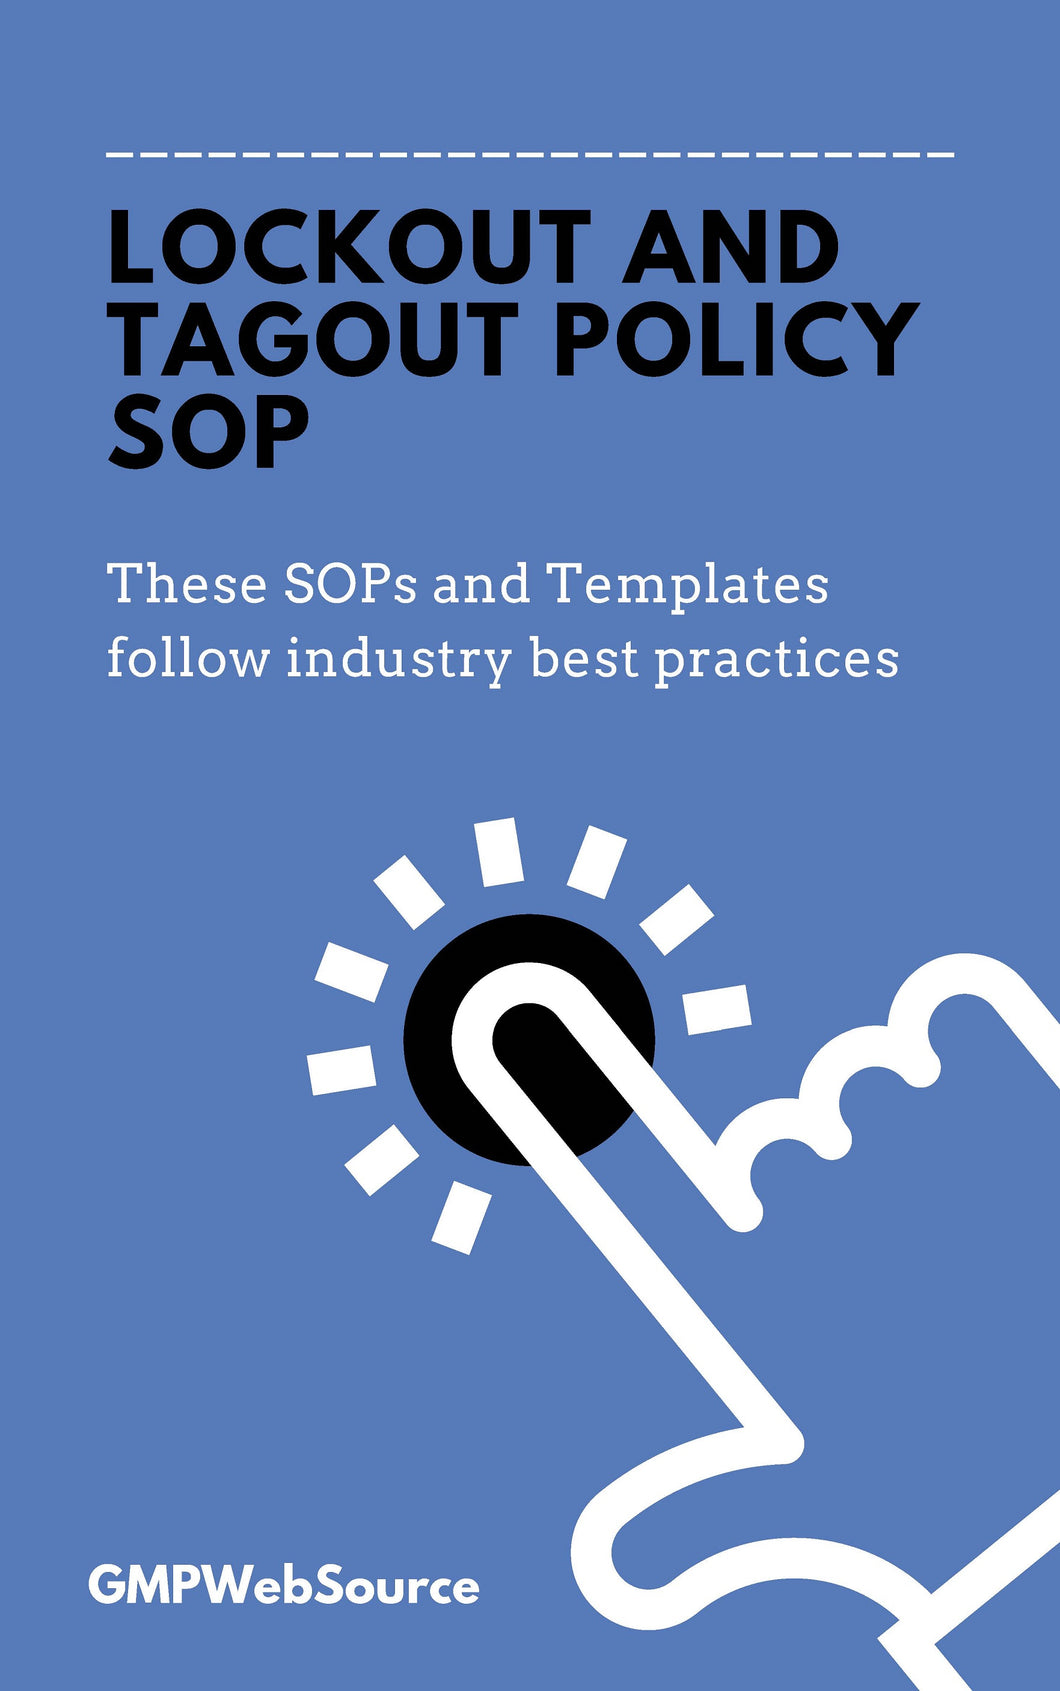 Lockout and Tagout Policy SOP